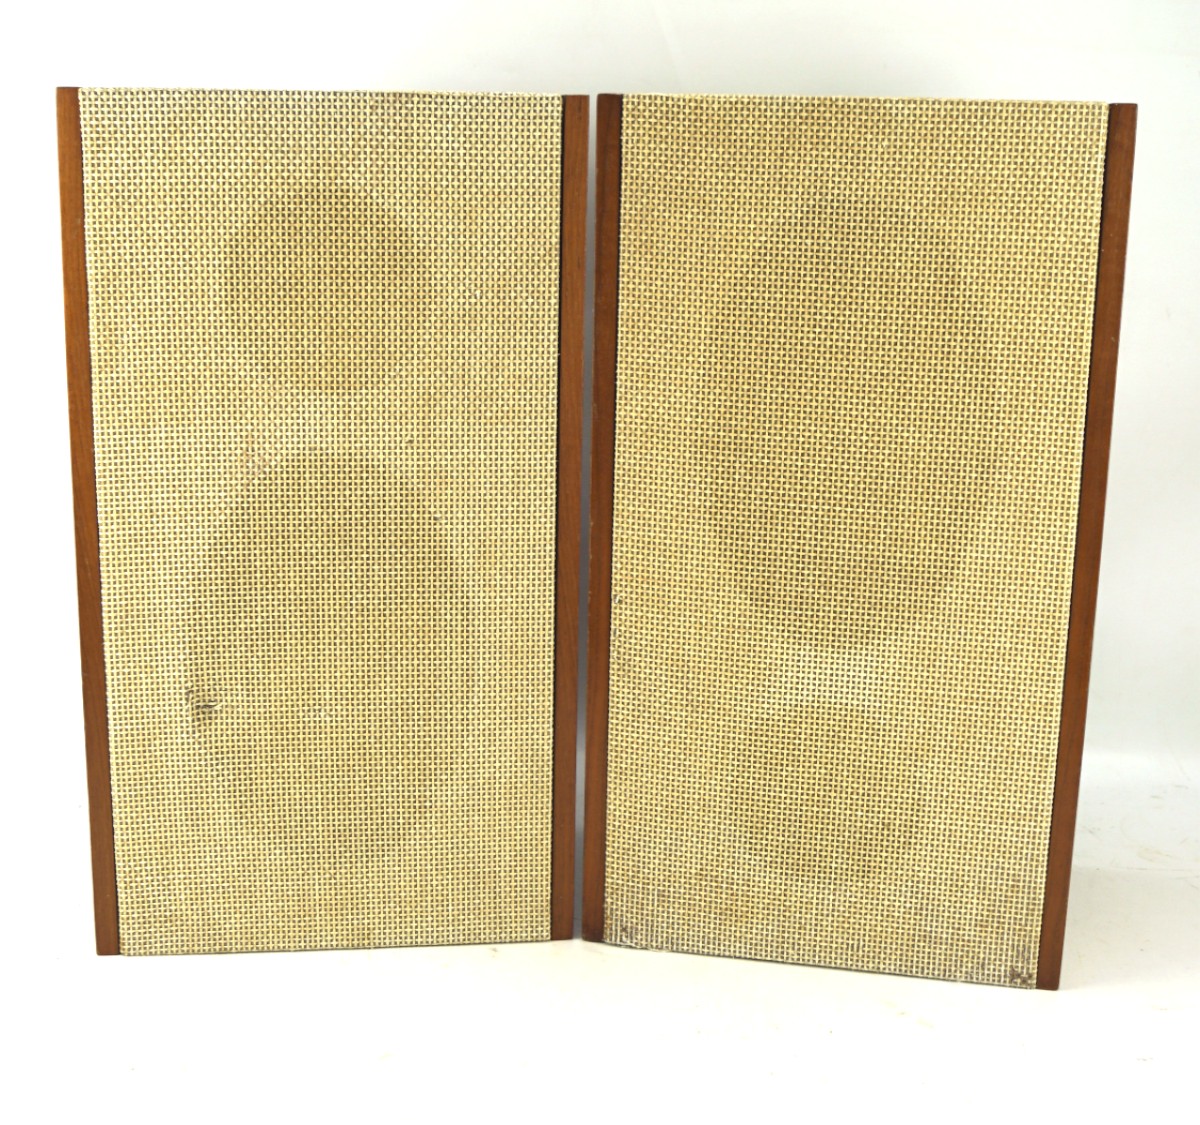 A pair of Dual speakers, type CL2,